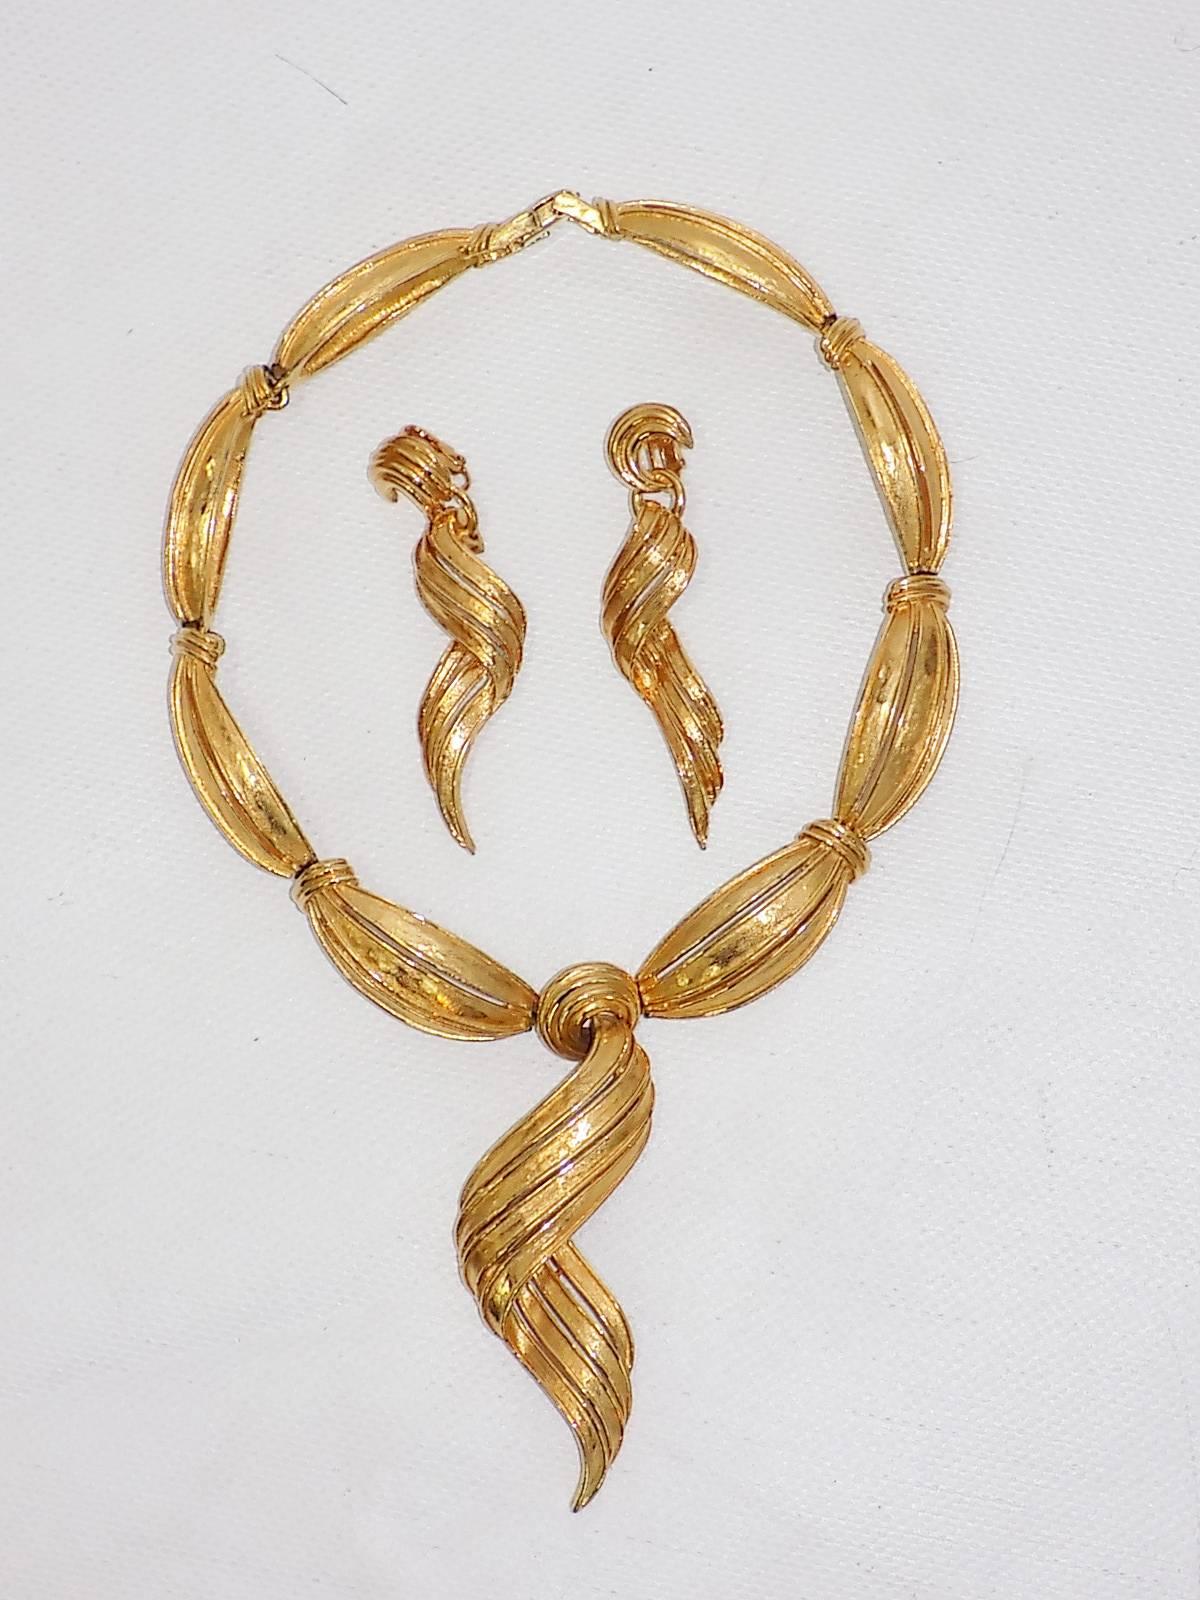 Vintage Boucher  massive  gold  choker necklace and drop earrings.
 Boucher apprenticed at Cartier’s as a model maker. In 1923, Cartier sent him to their New York workshop. When the stock market crashed 1929, Marcel lost his job and turned to